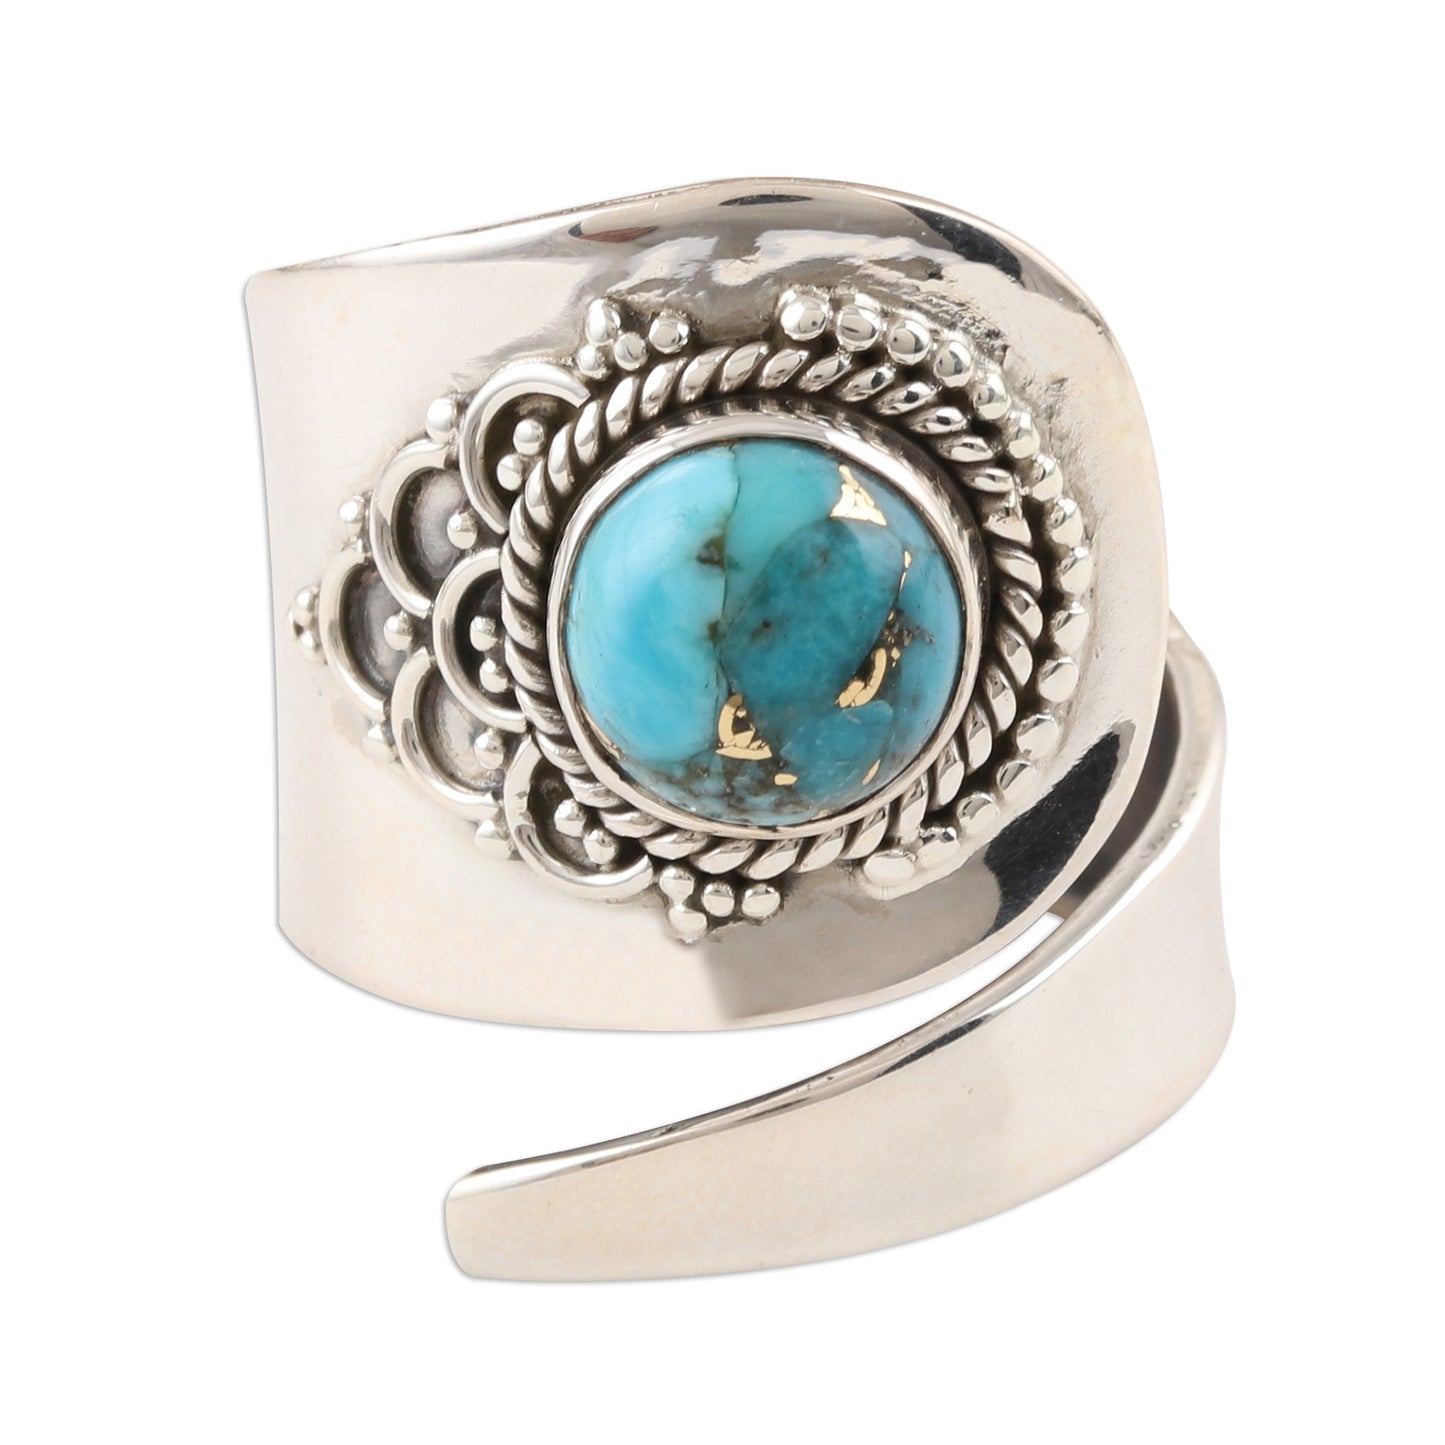 Mermaid Scales Composite Turquoise and Sterling Silver Wrap Ring